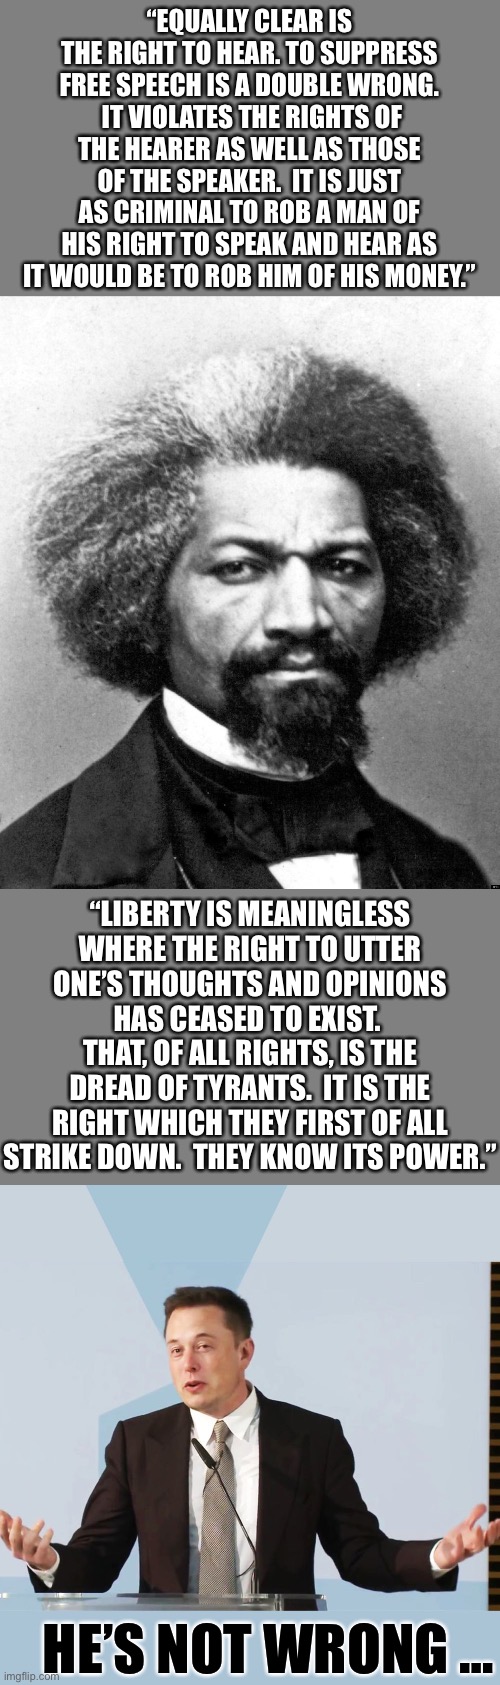 Frederick Douglass regarding free speech… | “EQUALLY CLEAR IS THE RIGHT TO HEAR. TO SUPPRESS FREE SPEECH IS A DOUBLE WRONG.  IT VIOLATES THE RIGHTS OF THE HEARER AS WELL AS THOSE OF THE SPEAKER.  IT IS JUST AS CRIMINAL TO ROB A MAN OF HIS RIGHT TO SPEAK AND HEAR AS IT WOULD BE TO ROB HIM OF HIS MONEY.”; “LIBERTY IS MEANINGLESS WHERE THE RIGHT TO UTTER ONE’S THOUGHTS AND OPINIONS HAS CEASED TO EXIST.  THAT, OF ALL RIGHTS, IS THE DREAD OF TYRANTS.  IT IS THE RIGHT WHICH THEY FIRST OF ALL STRIKE DOWN.  THEY KNOW ITS POWER.”; HE’S NOT WRONG … | image tagged in frederick douglass,elon musk,free speech,Conservative | made w/ Imgflip meme maker